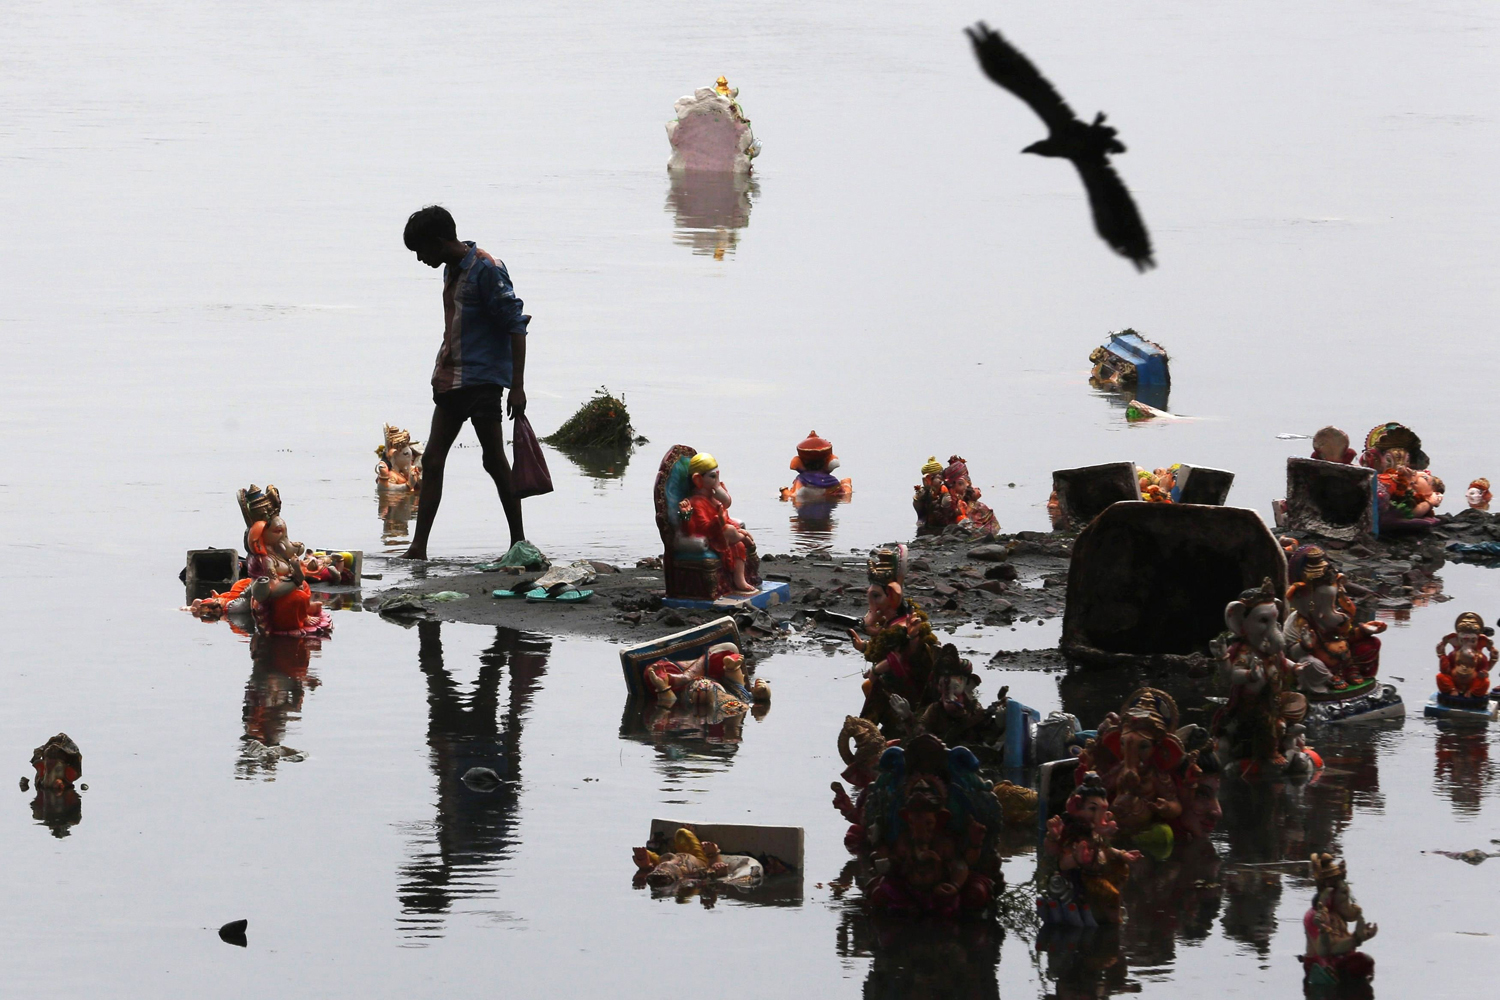 A boy collects items thrown by devotees as religious offerings next to idols of the Hindu elephant god Ganesh a day after they were immersed in the waters of the Sabarmati river in Ahmedabad